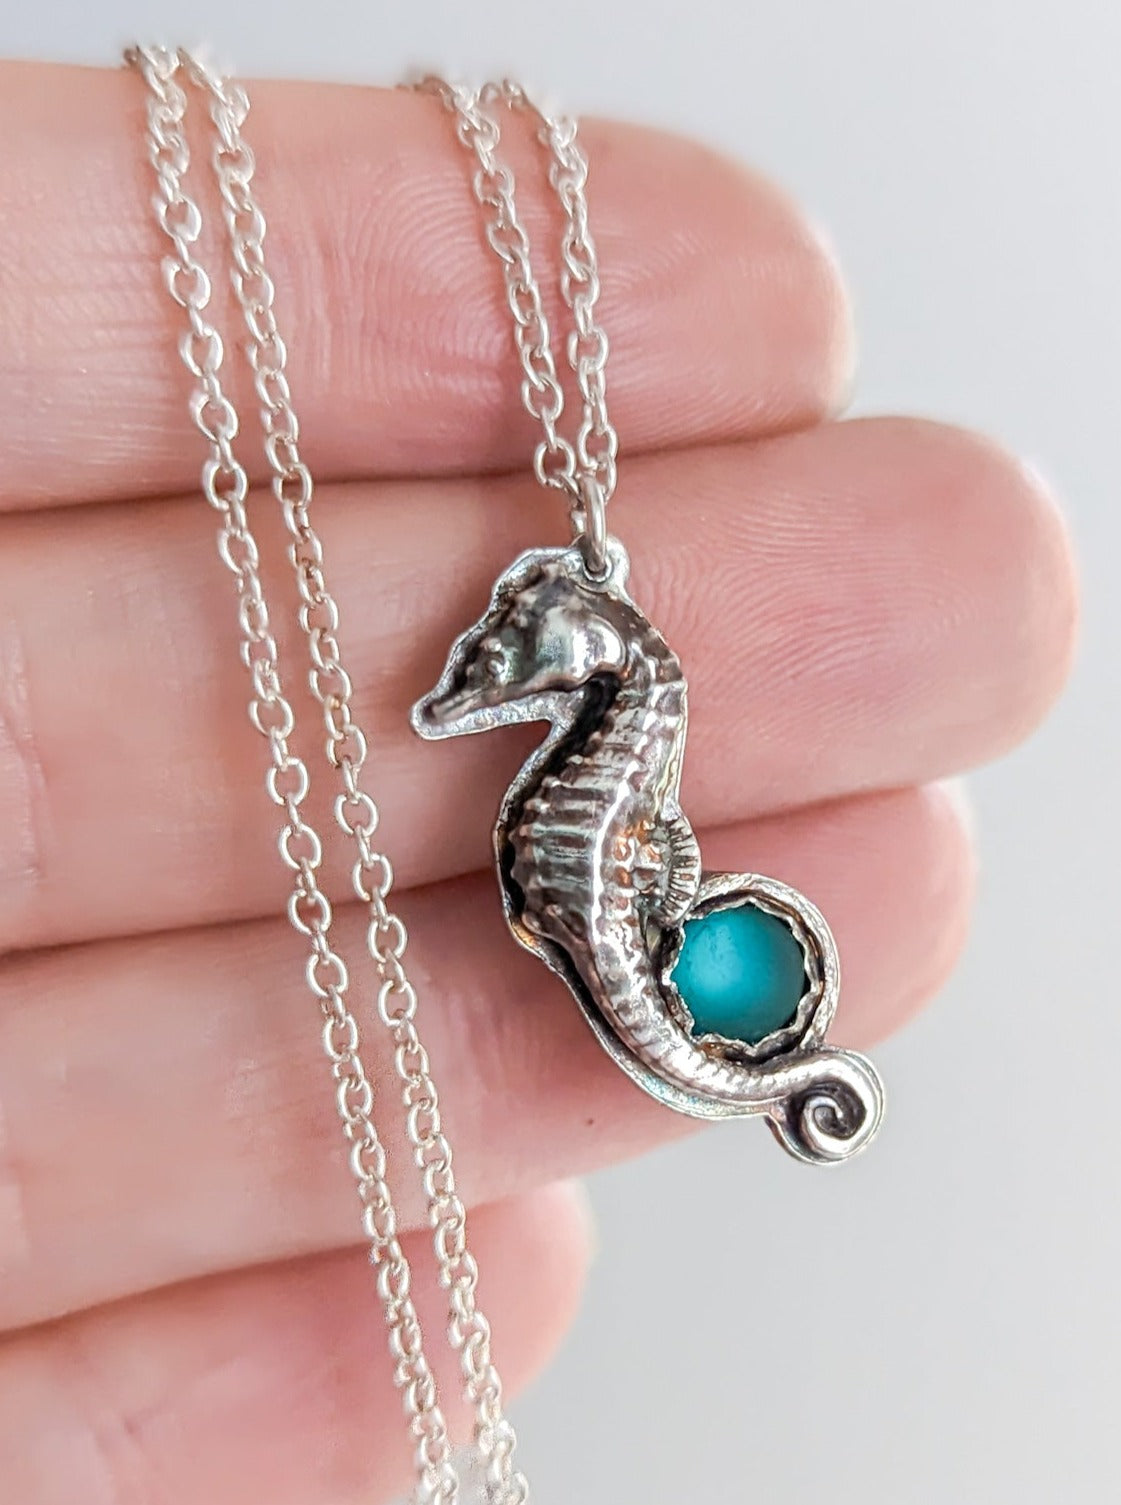 Petite silver seahorse necklace with turquoise stone